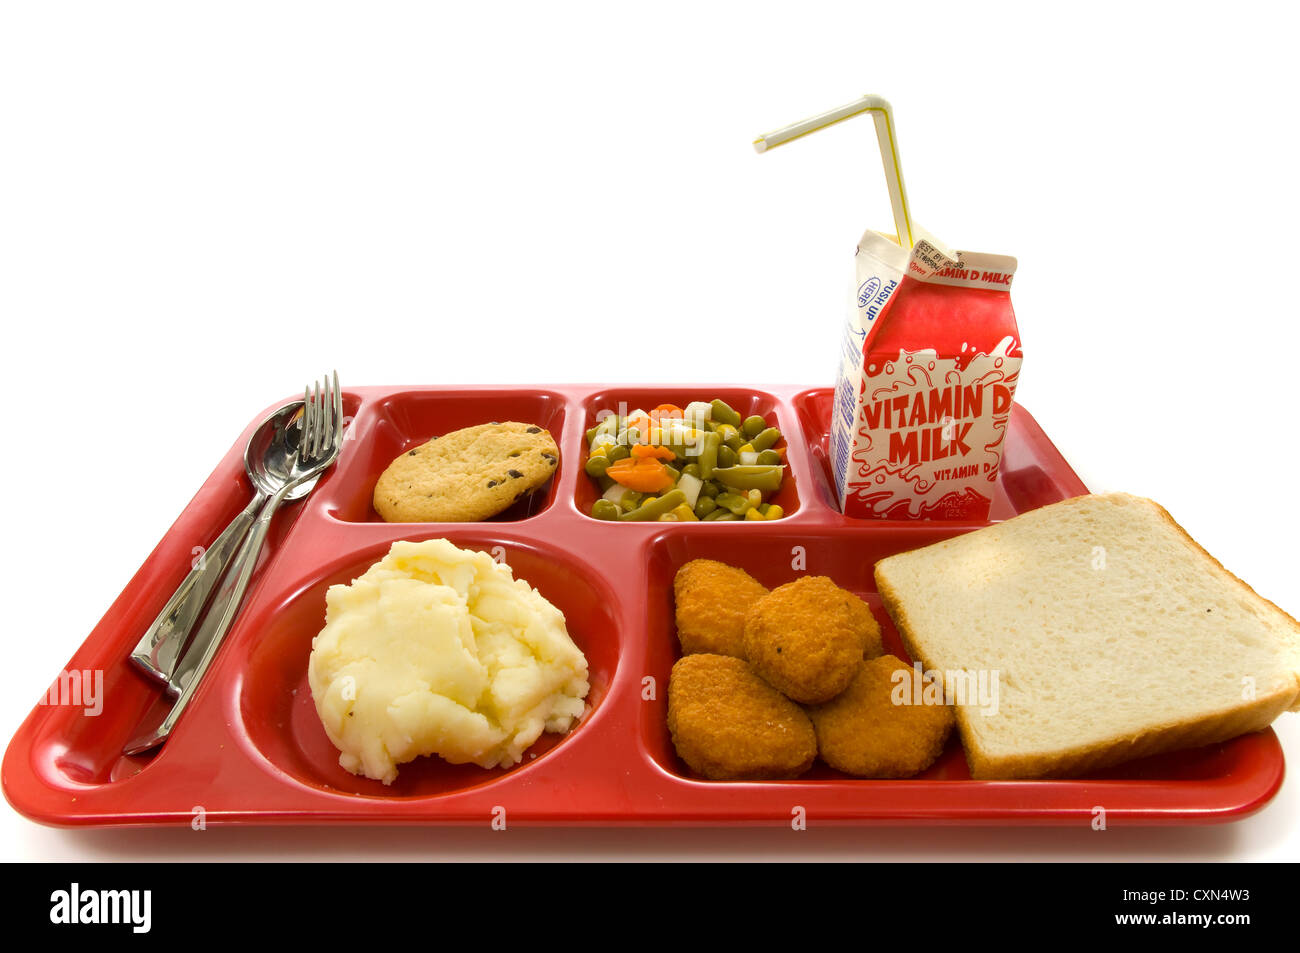 School lunch tray on white background Stock Photo